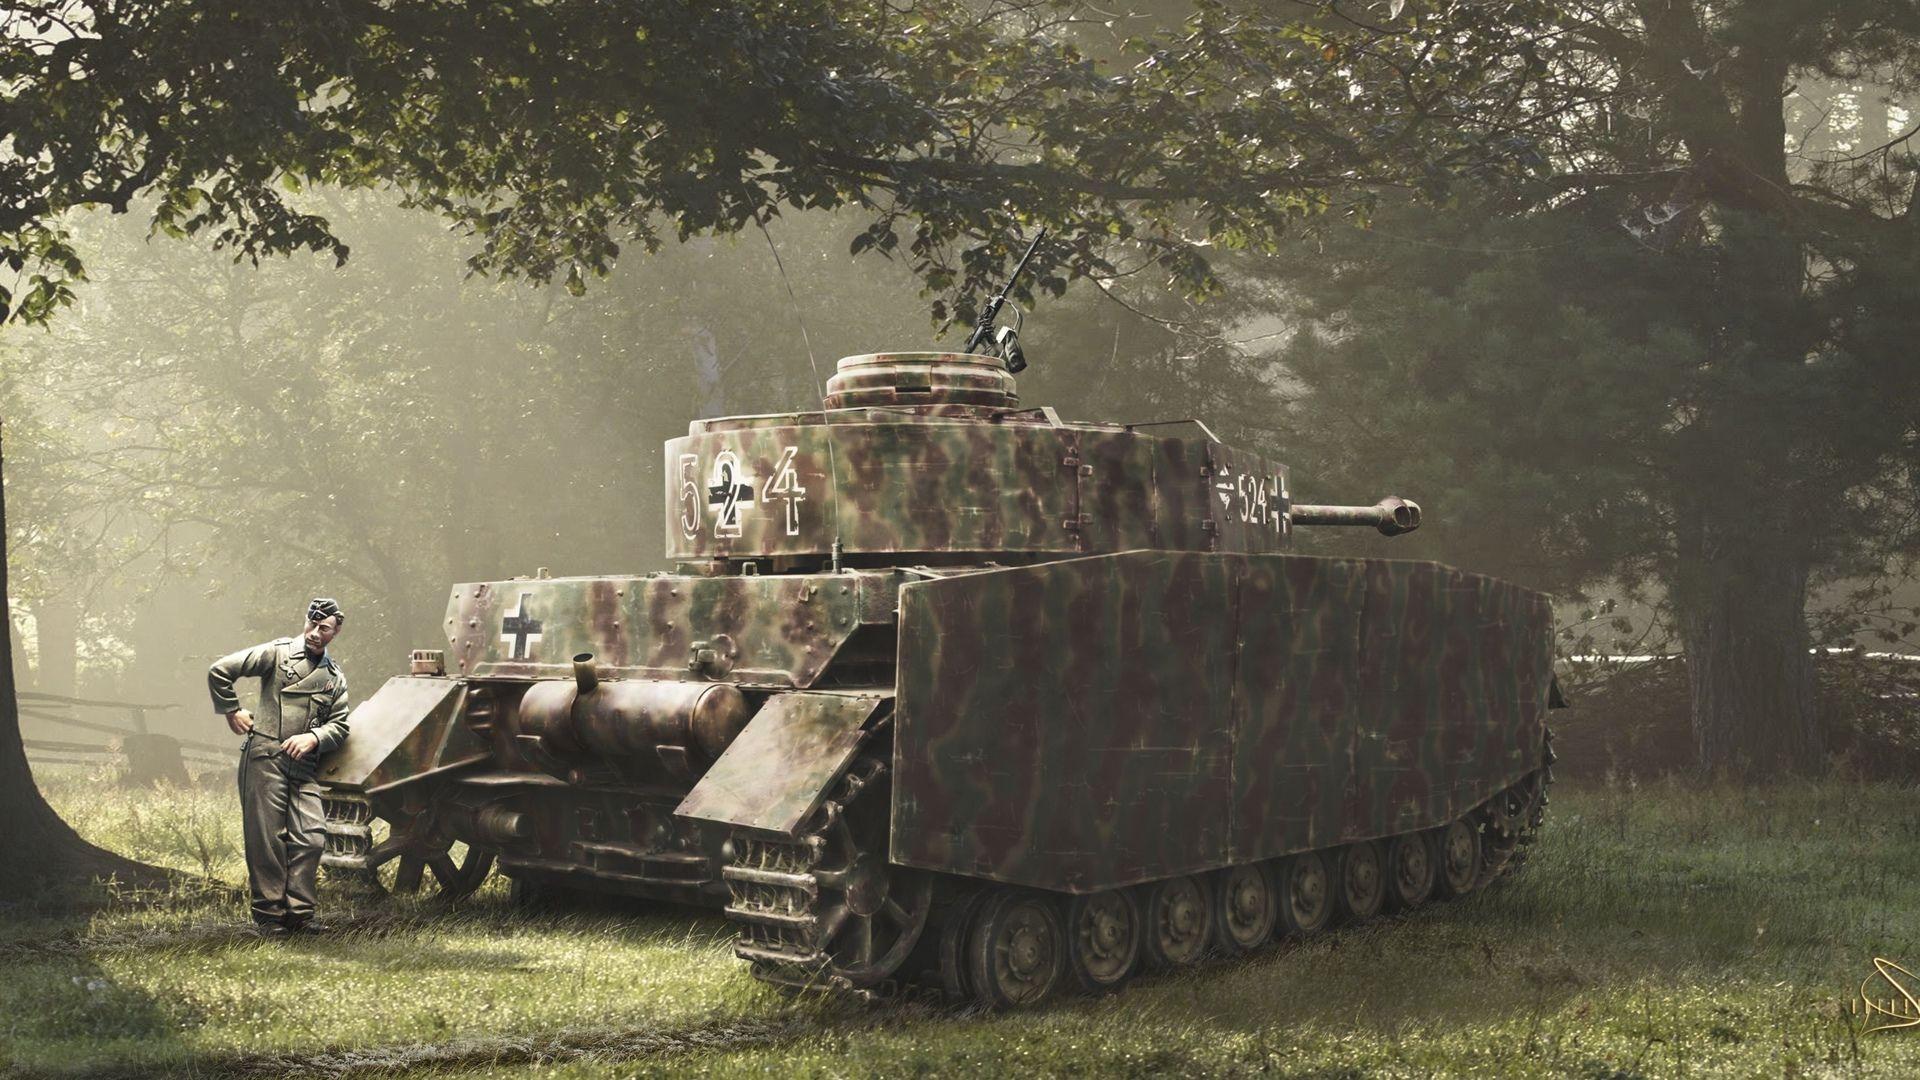 Download Wallpaper Tank, Soldiers, Pz Iv, Cartoon Photo, Forest